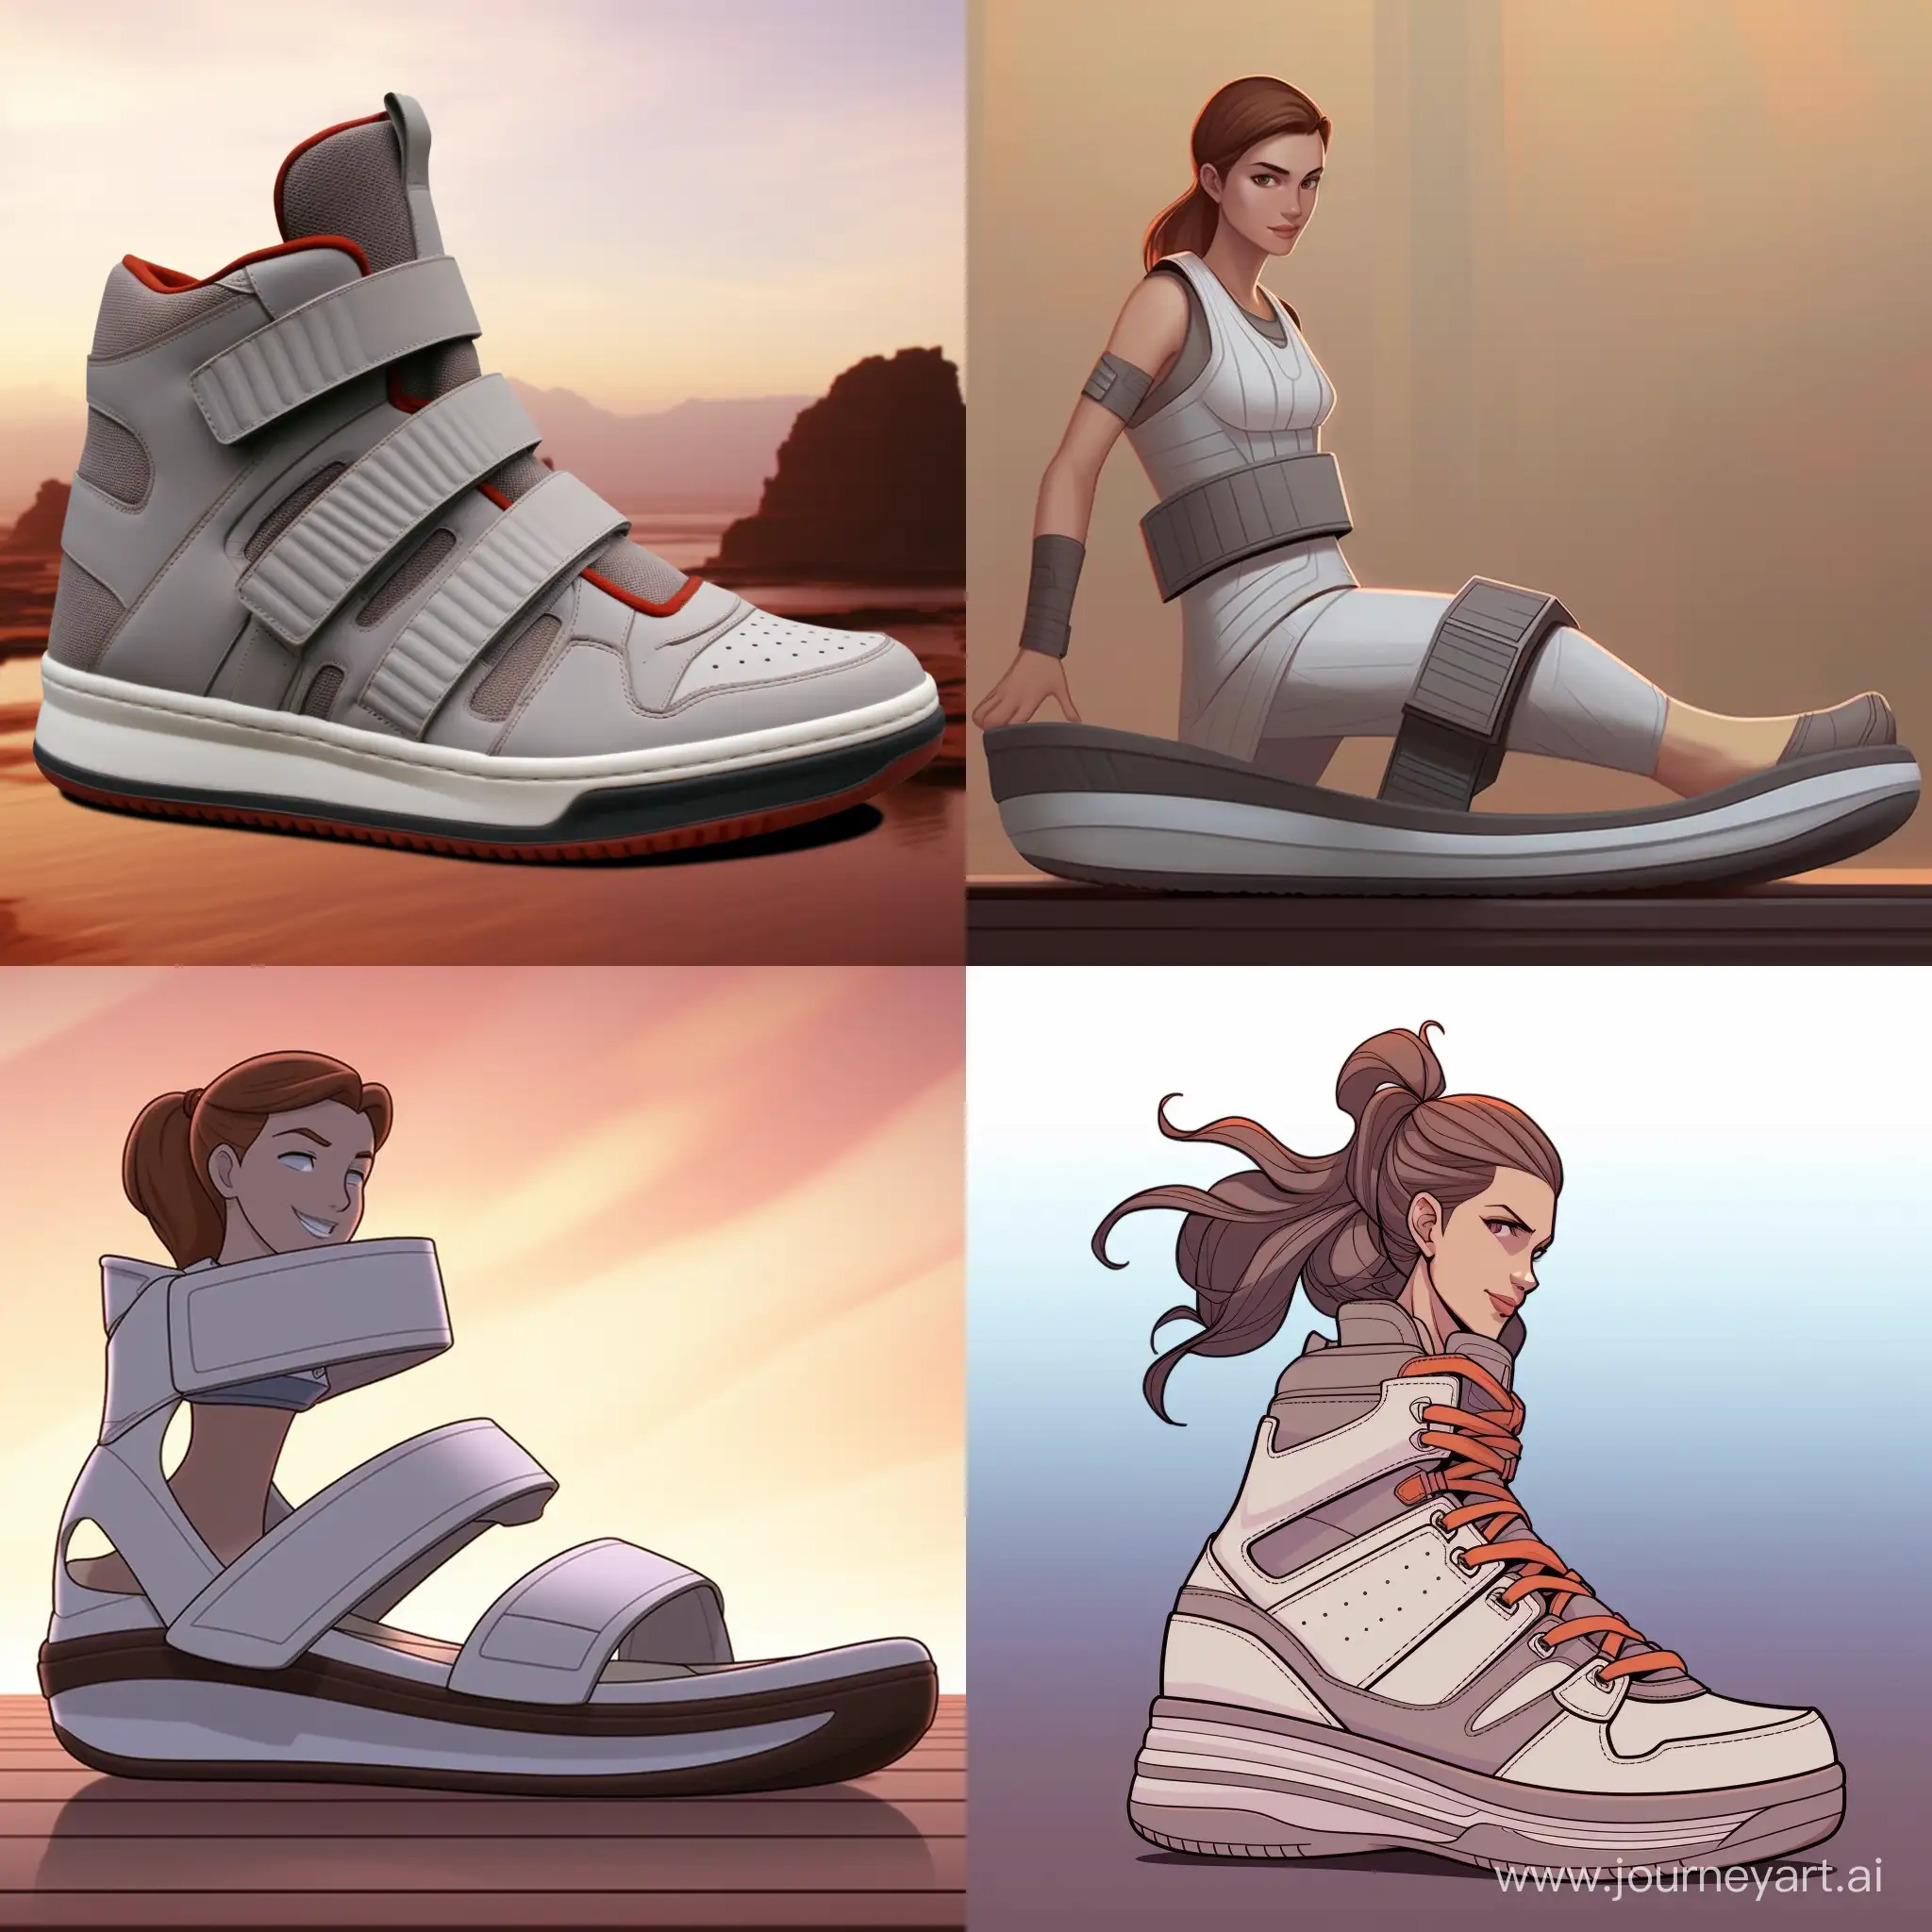 Rey-Star-Wars-Character-Displaying-Her-Soles-in-11-Aspect-Ratio